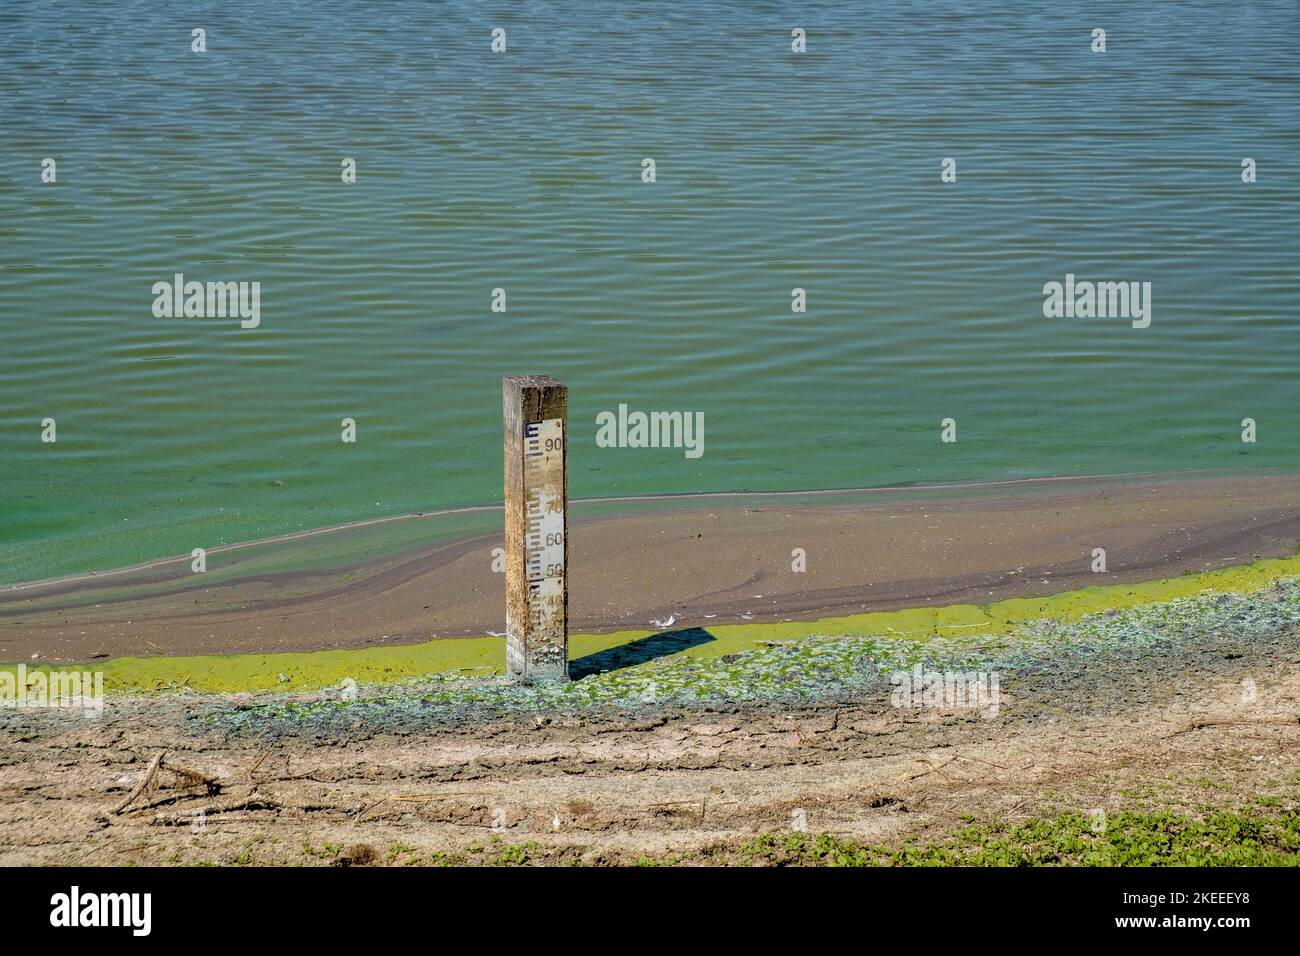 At the Parc du Marquenterre bird sanctuary, Baie de Somme, France, during the summer drought of 2022, the water level is below minimum. Stock Photo